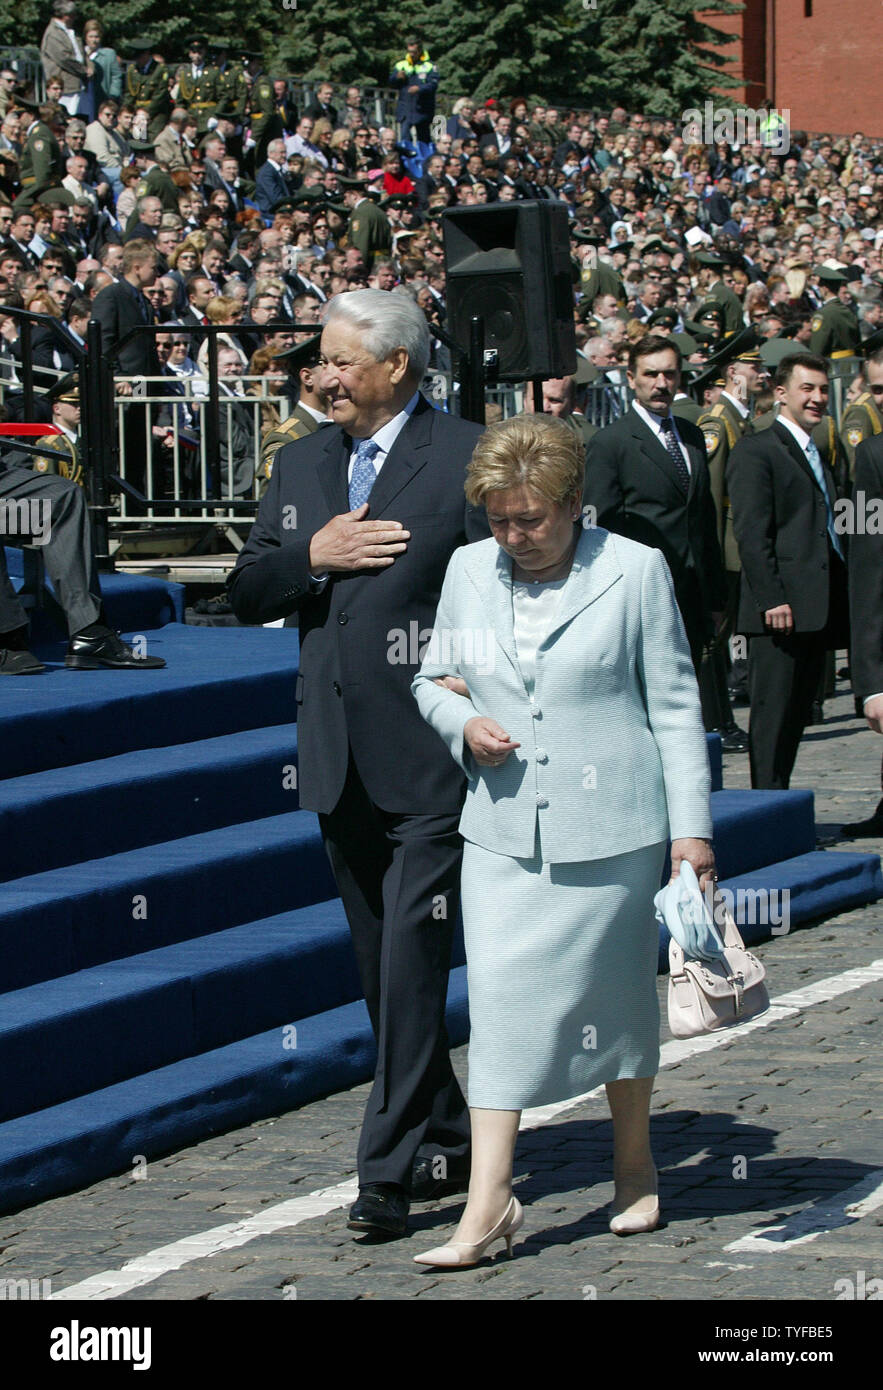 Former Russian President Boris Yeltsin, shown in this 2000 file photo, died at the age of 76 on April 23, 2007 in Moscow. Yeltsin pushed Russia to democracy and a market economy after helping in the collapse of the Soviet Union communist state in 1991. In this file photo, Former Russian President Boris Yeltsin with his wife Naina attends a celebration of Would War II victory at the Red Square in Moscow Kremlin on May 9, 2004. (UPI Photo/Anatoli Zhdanov) Stock Photo